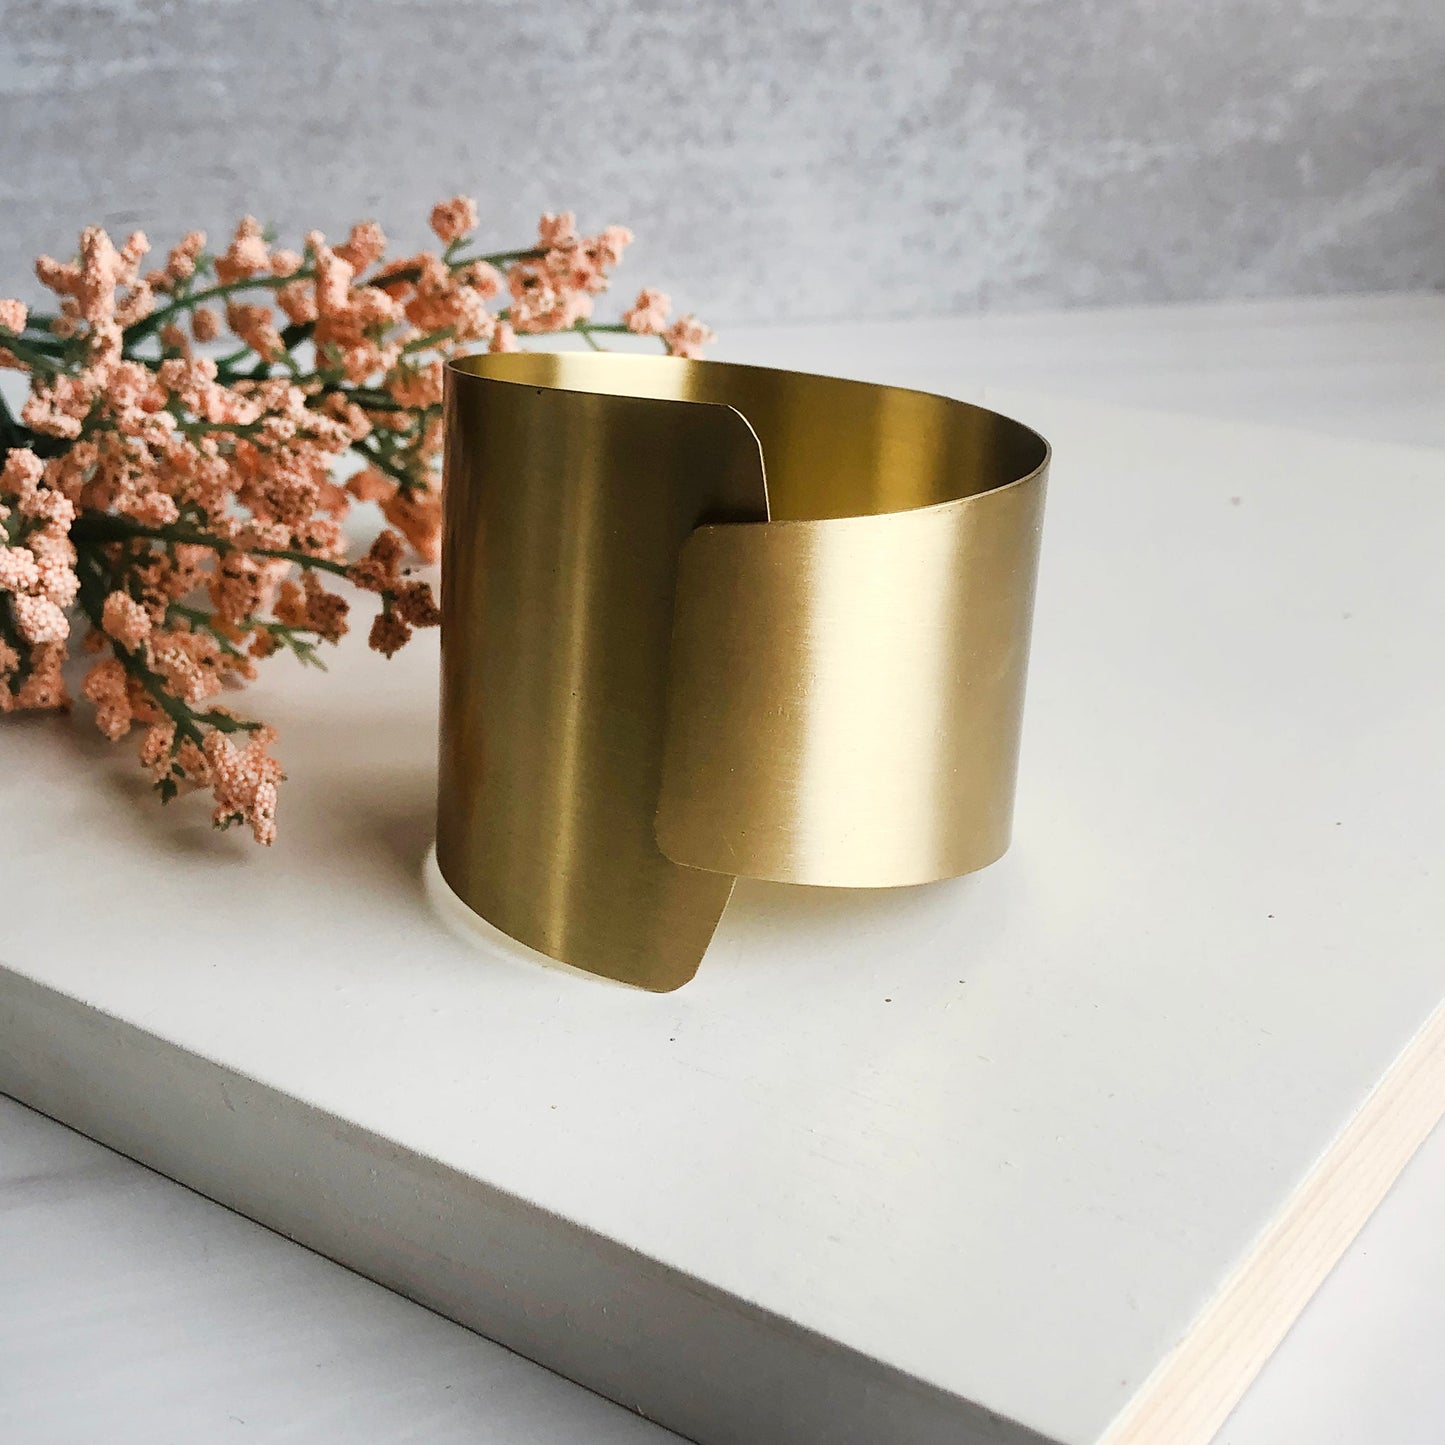 A thick band of metal wraps around and overlaps to form a large gold cuff bracelet.